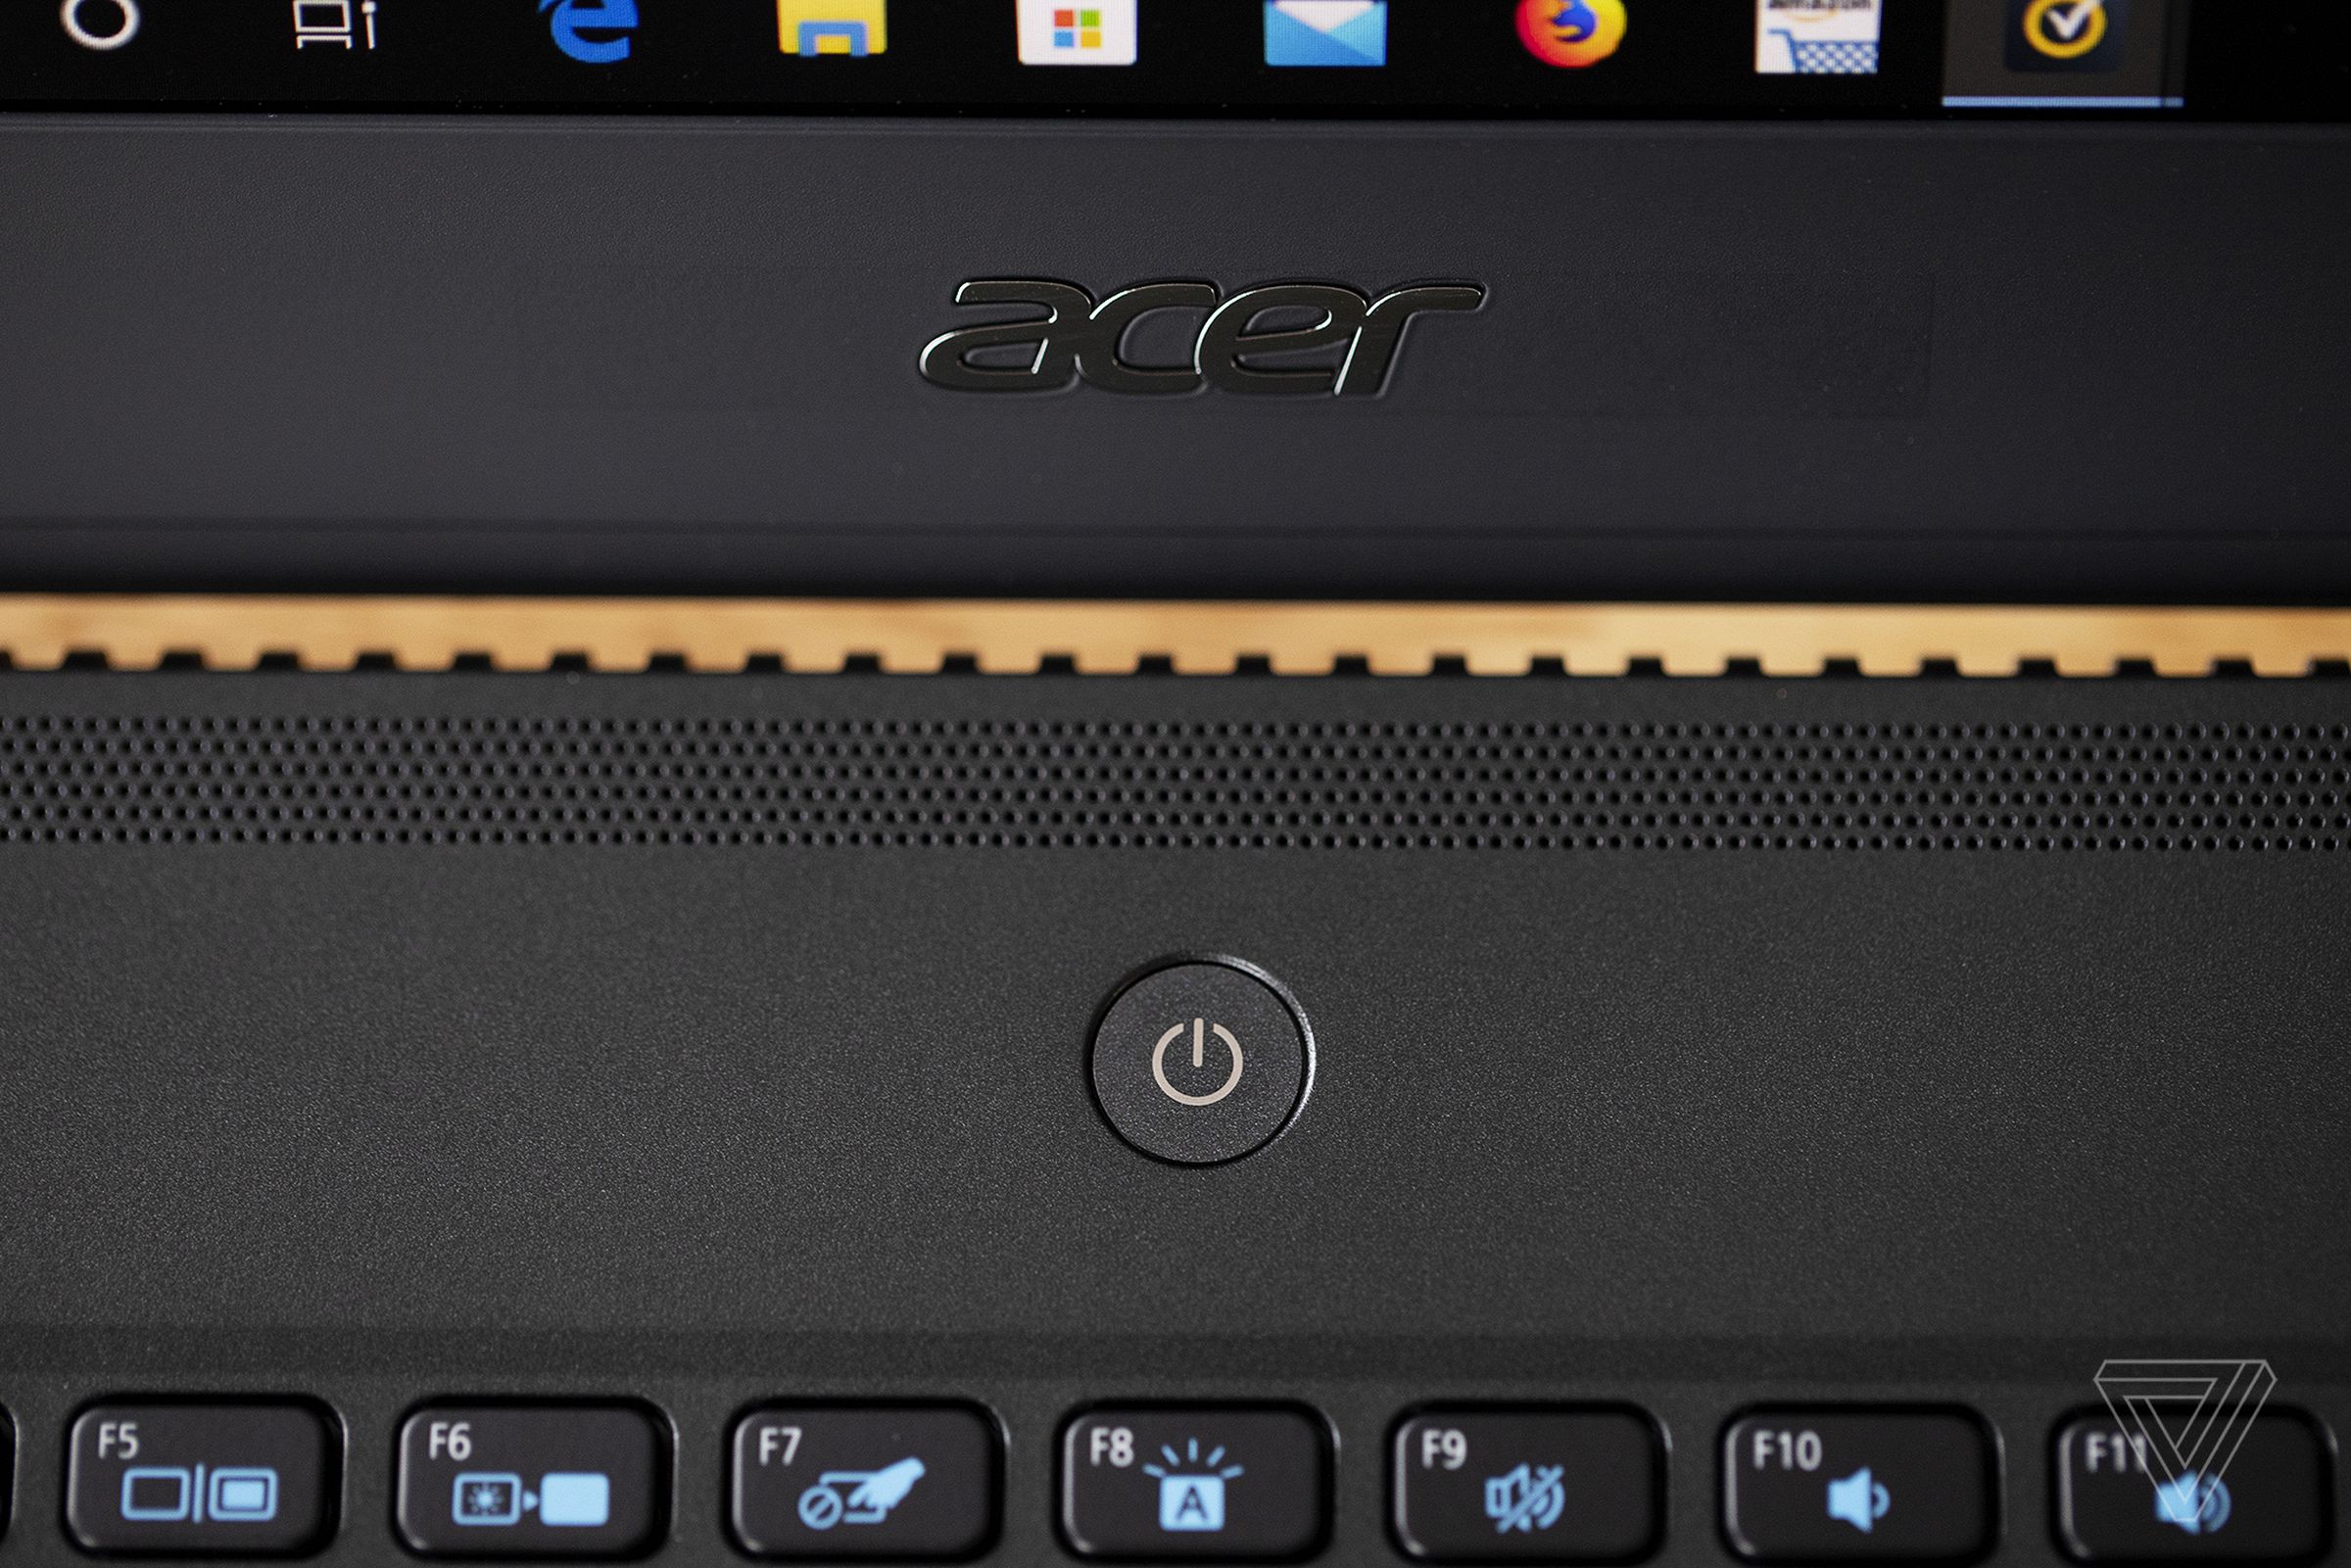 The Acer logo and power button on the Acer TravelMate P6.